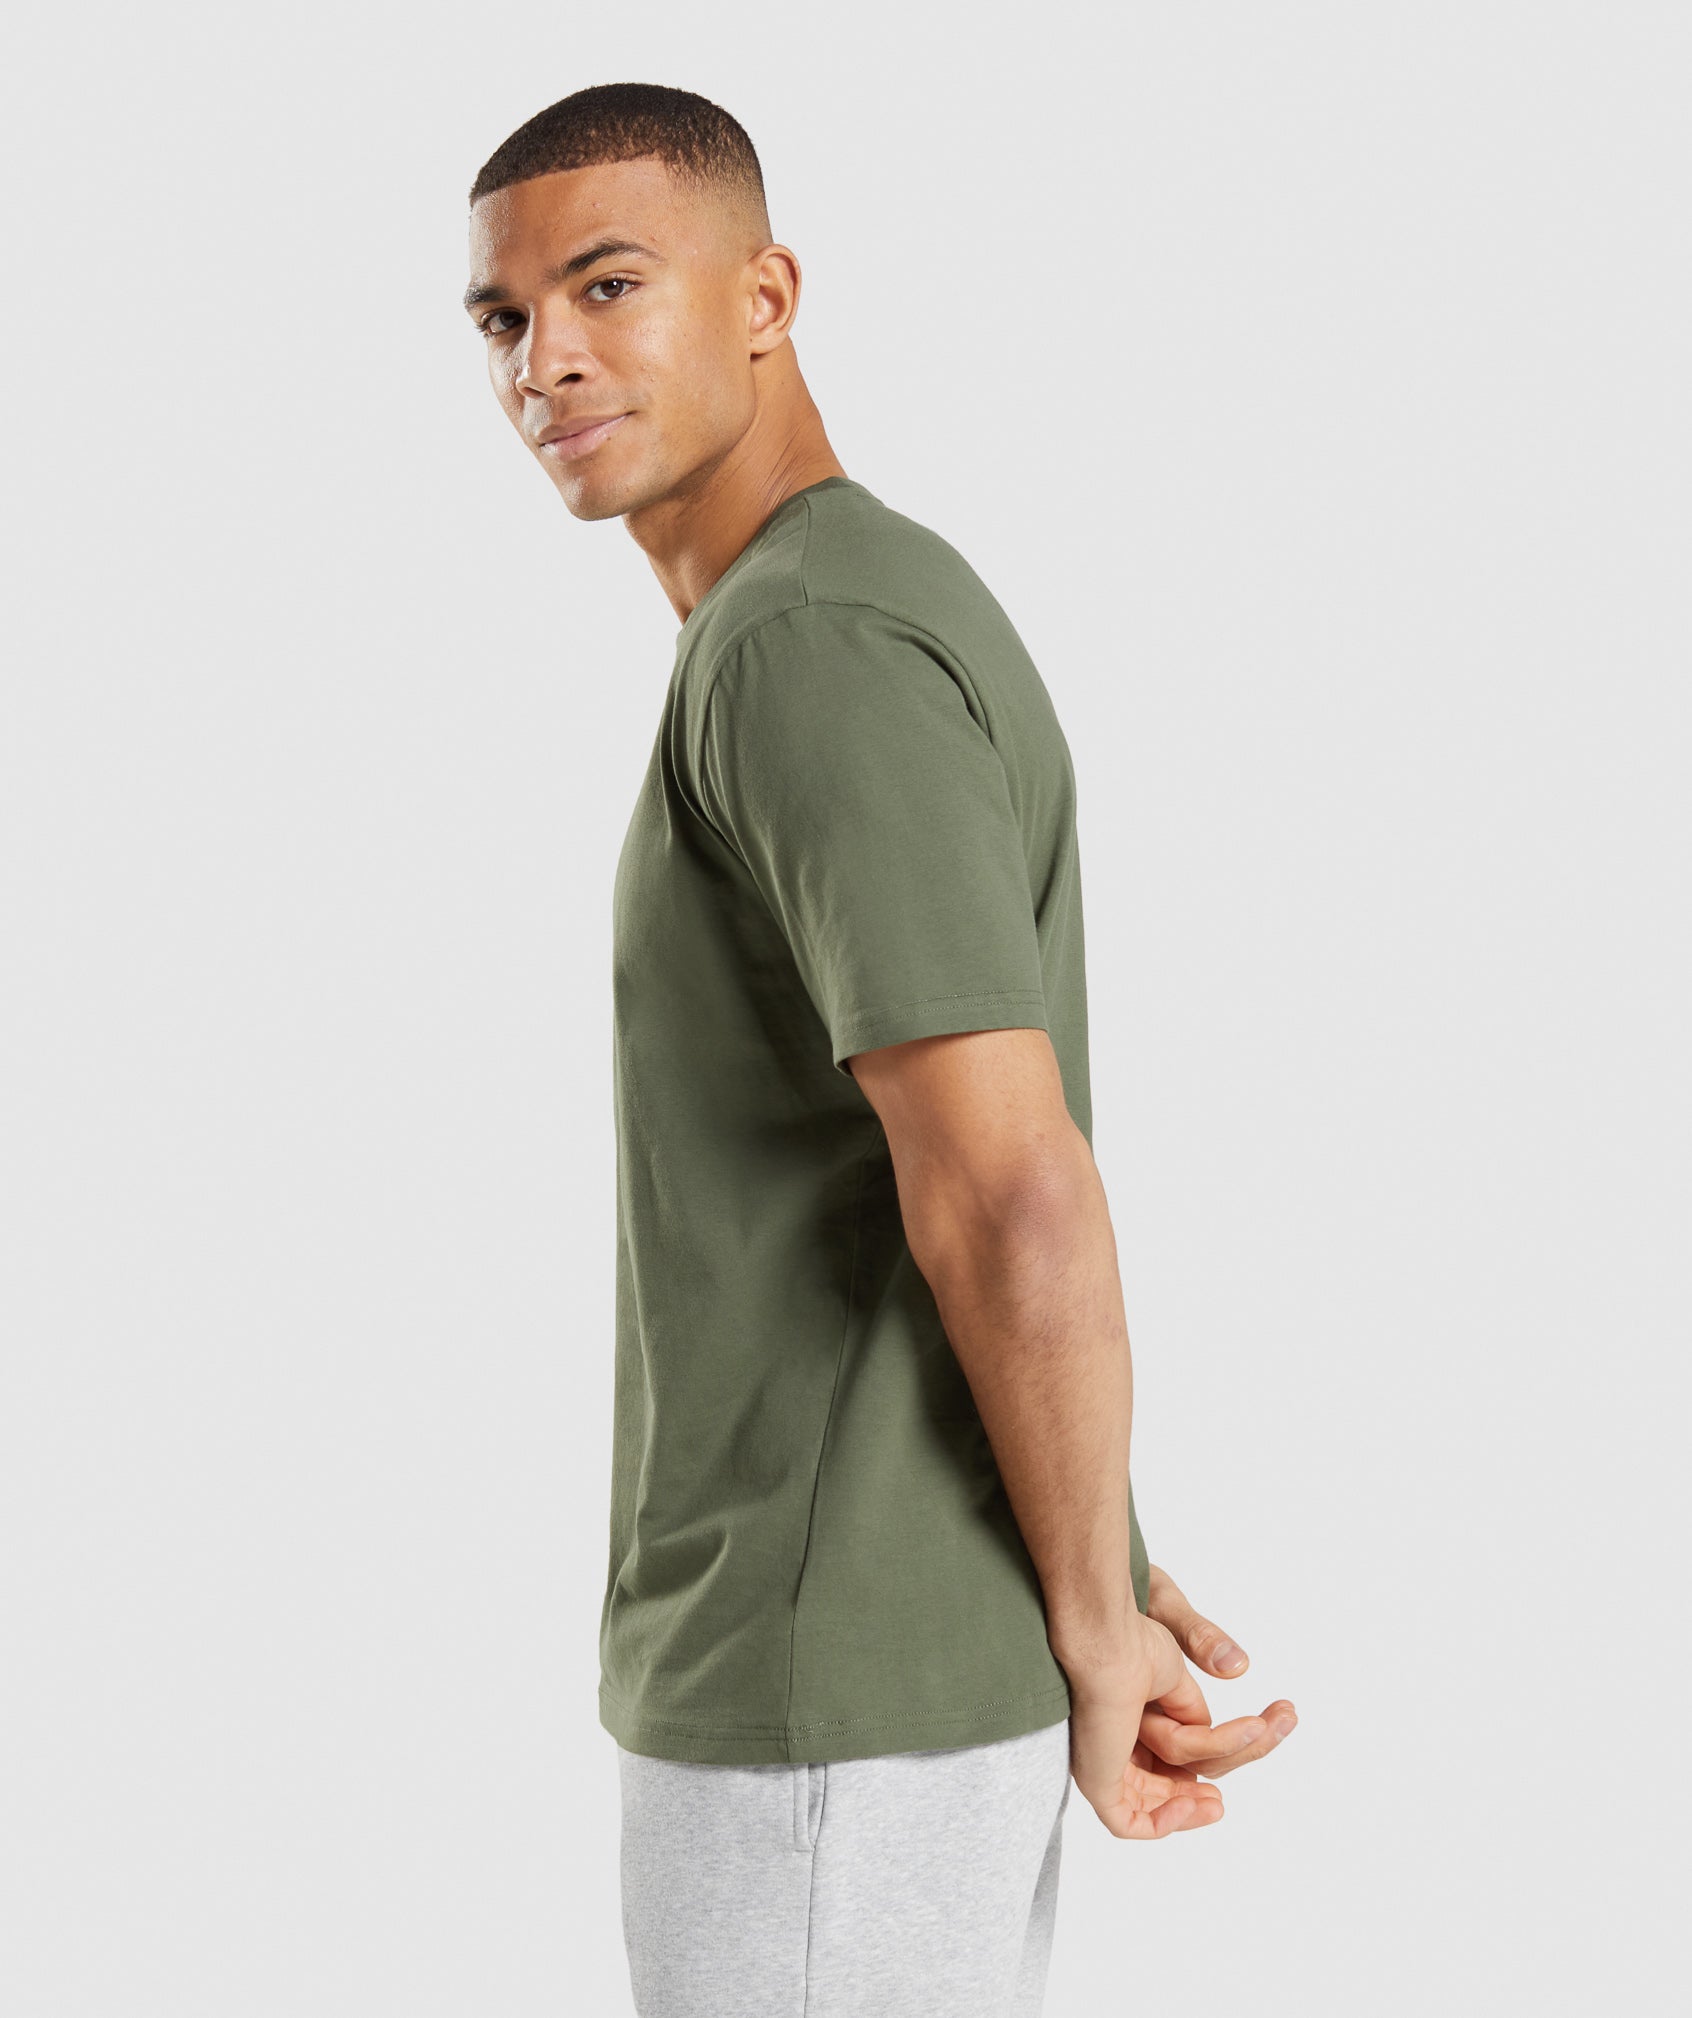 Crest T-Shirt in Core Olive - view 3